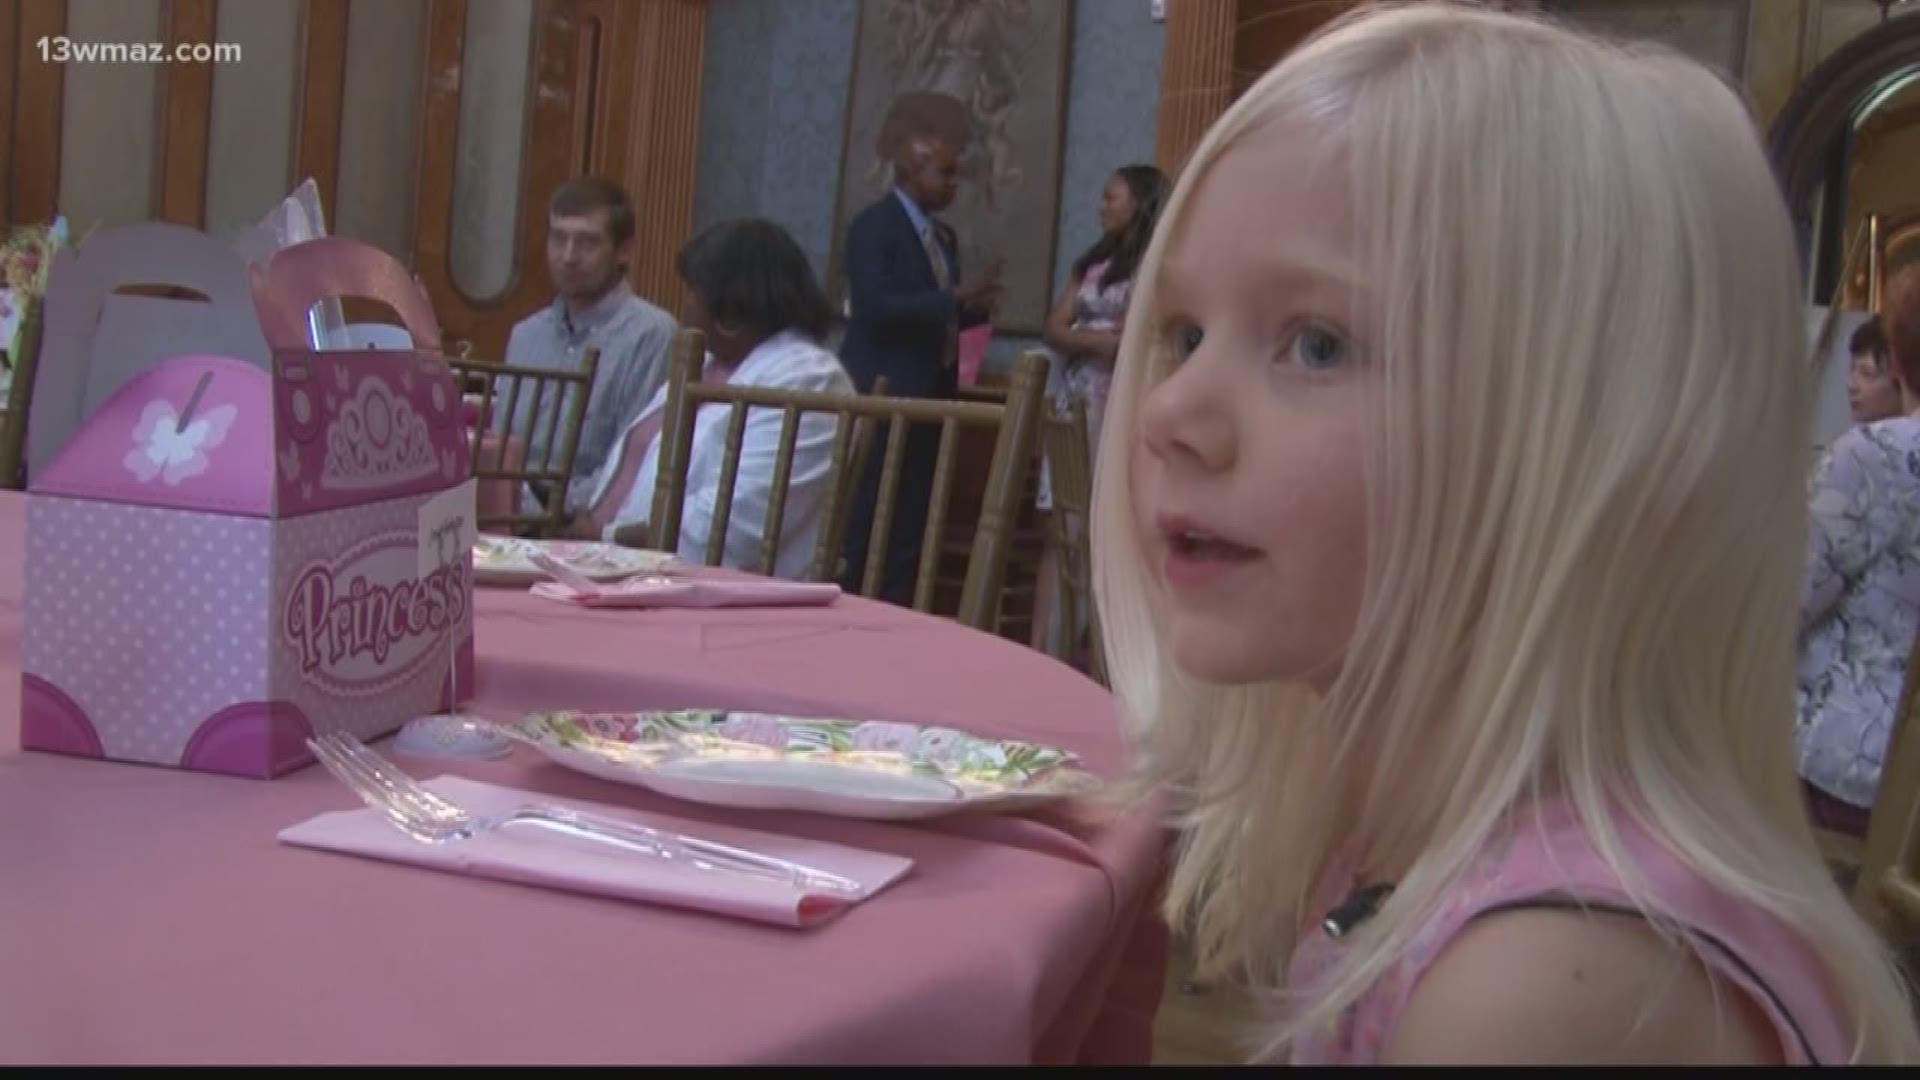 The 10th annual Princess Tea Party was held at the Historic Hay House in Macon Sunday. 2018 Miss Georgia and other title holders from around the state were in attendance to give little girls their advice.